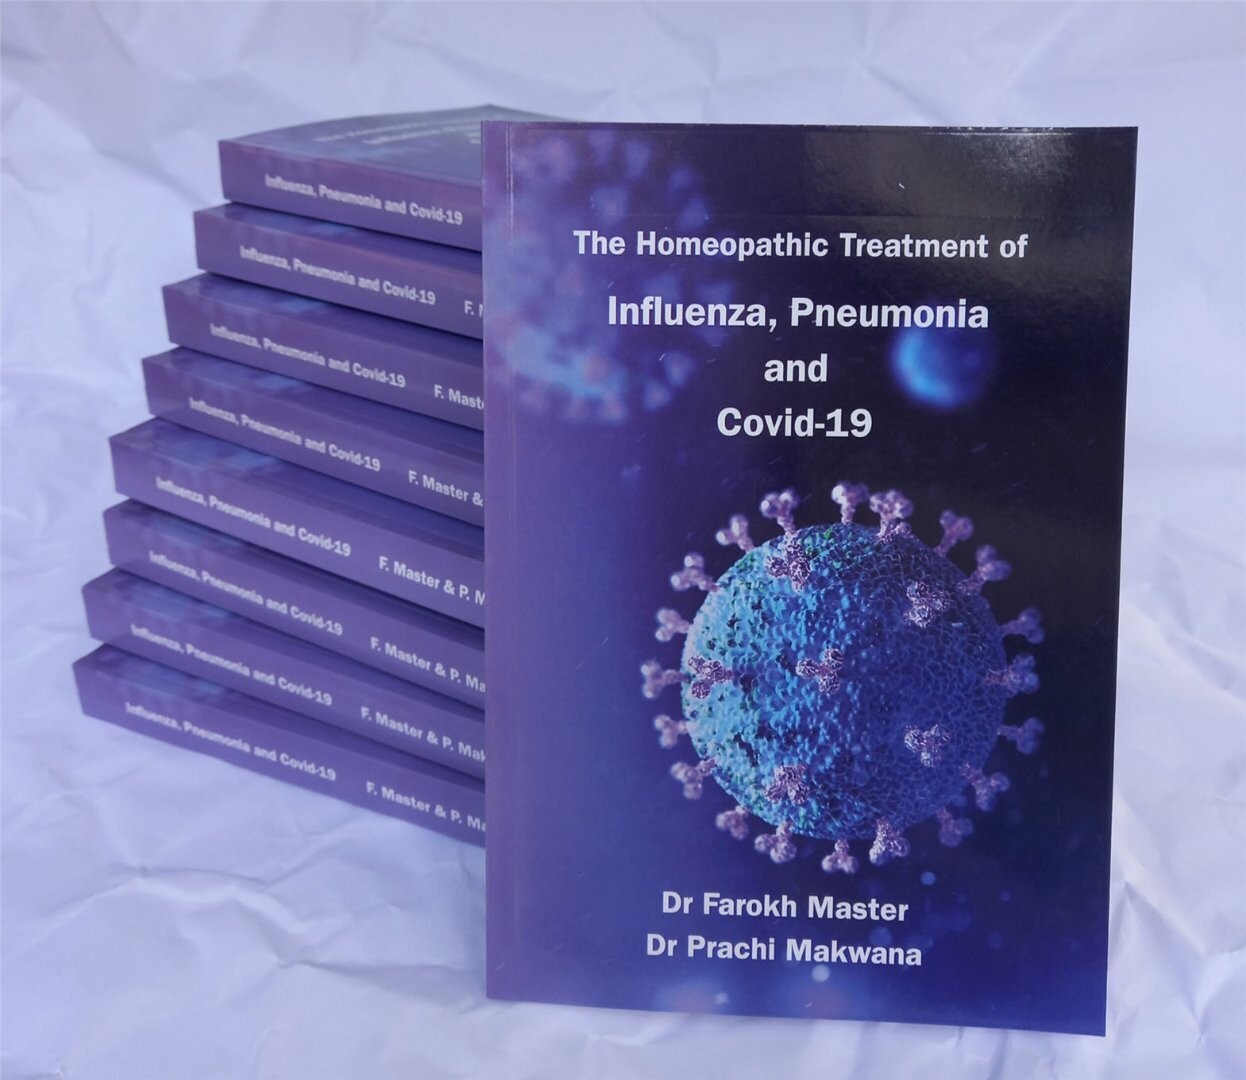 Homeopathic treatment of influenza, pneumonia and Covid-19 (new book by Dr Farokh Master)